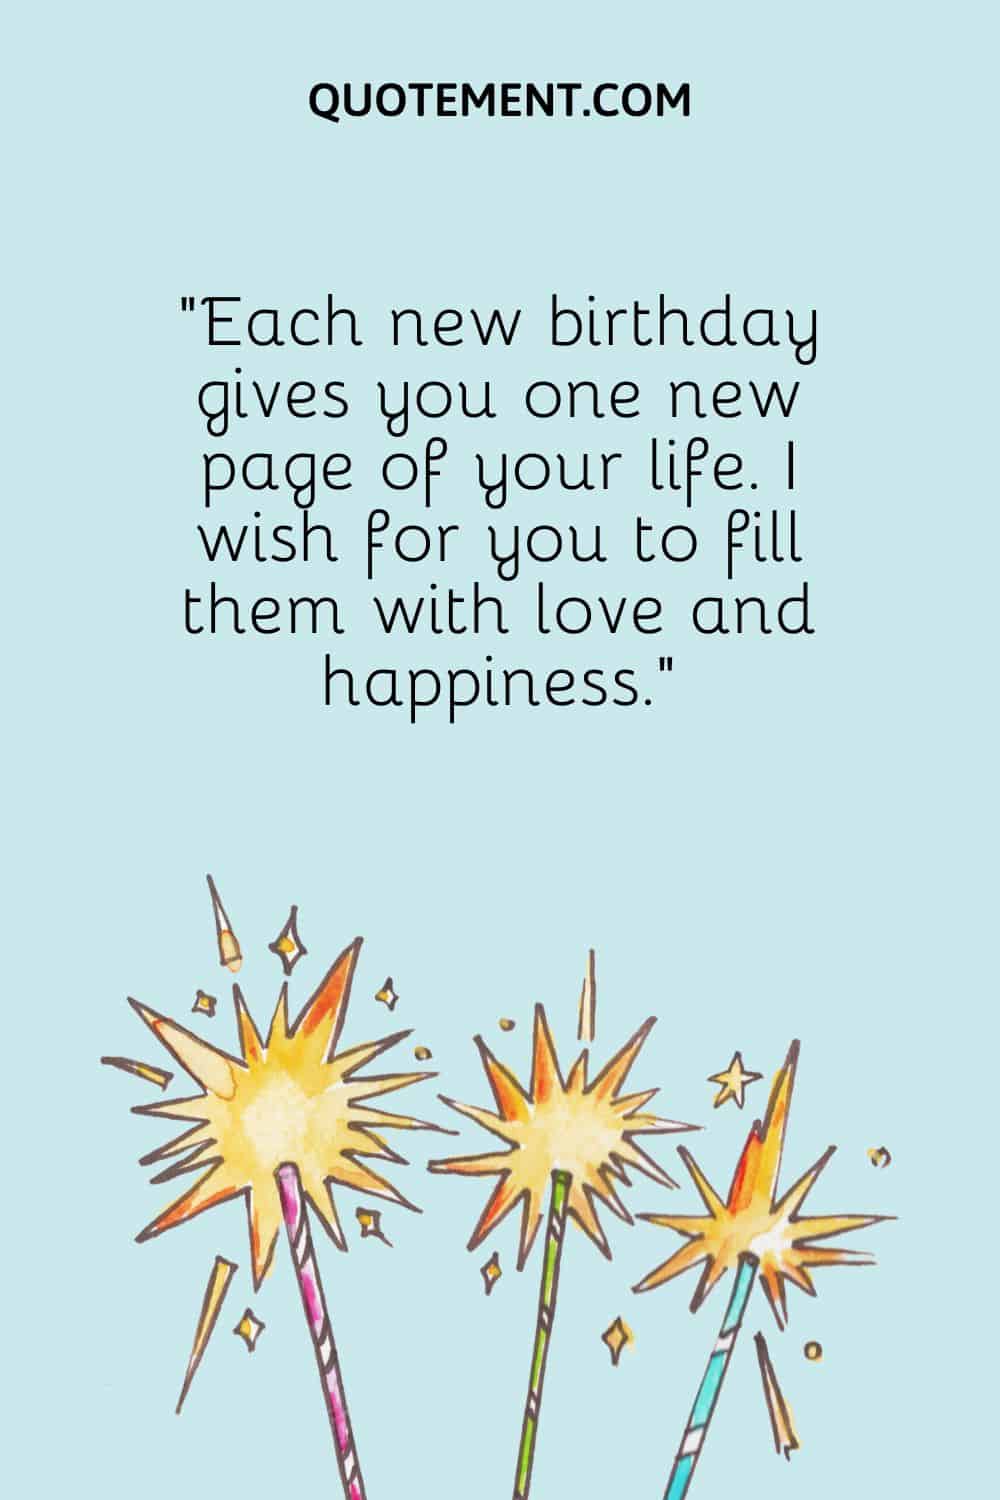 Each new birthday gives you one new page of your life